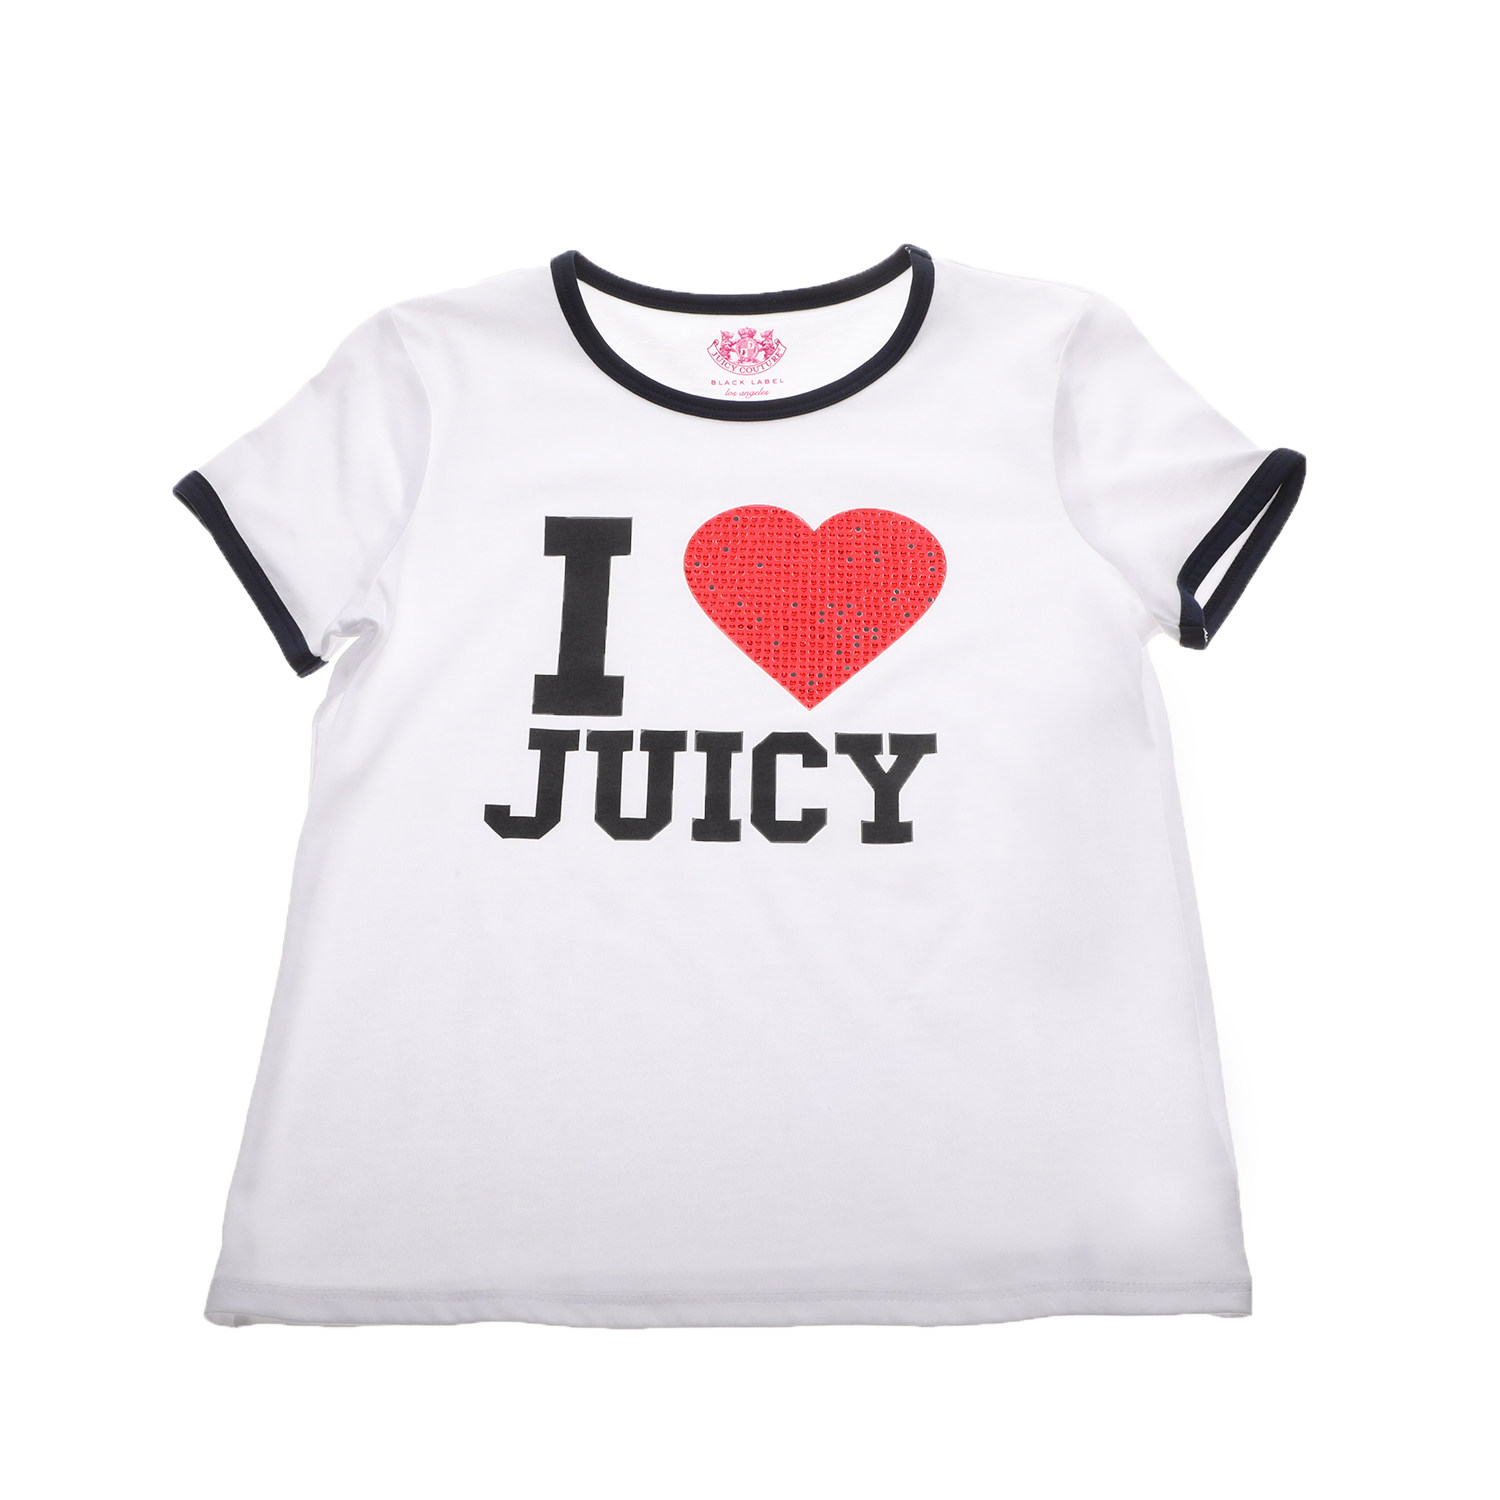 JUICY COUTURE KIDS Παιδική μπλούζα JUICY COUTURE KIDS I HEART JUICY λευκή